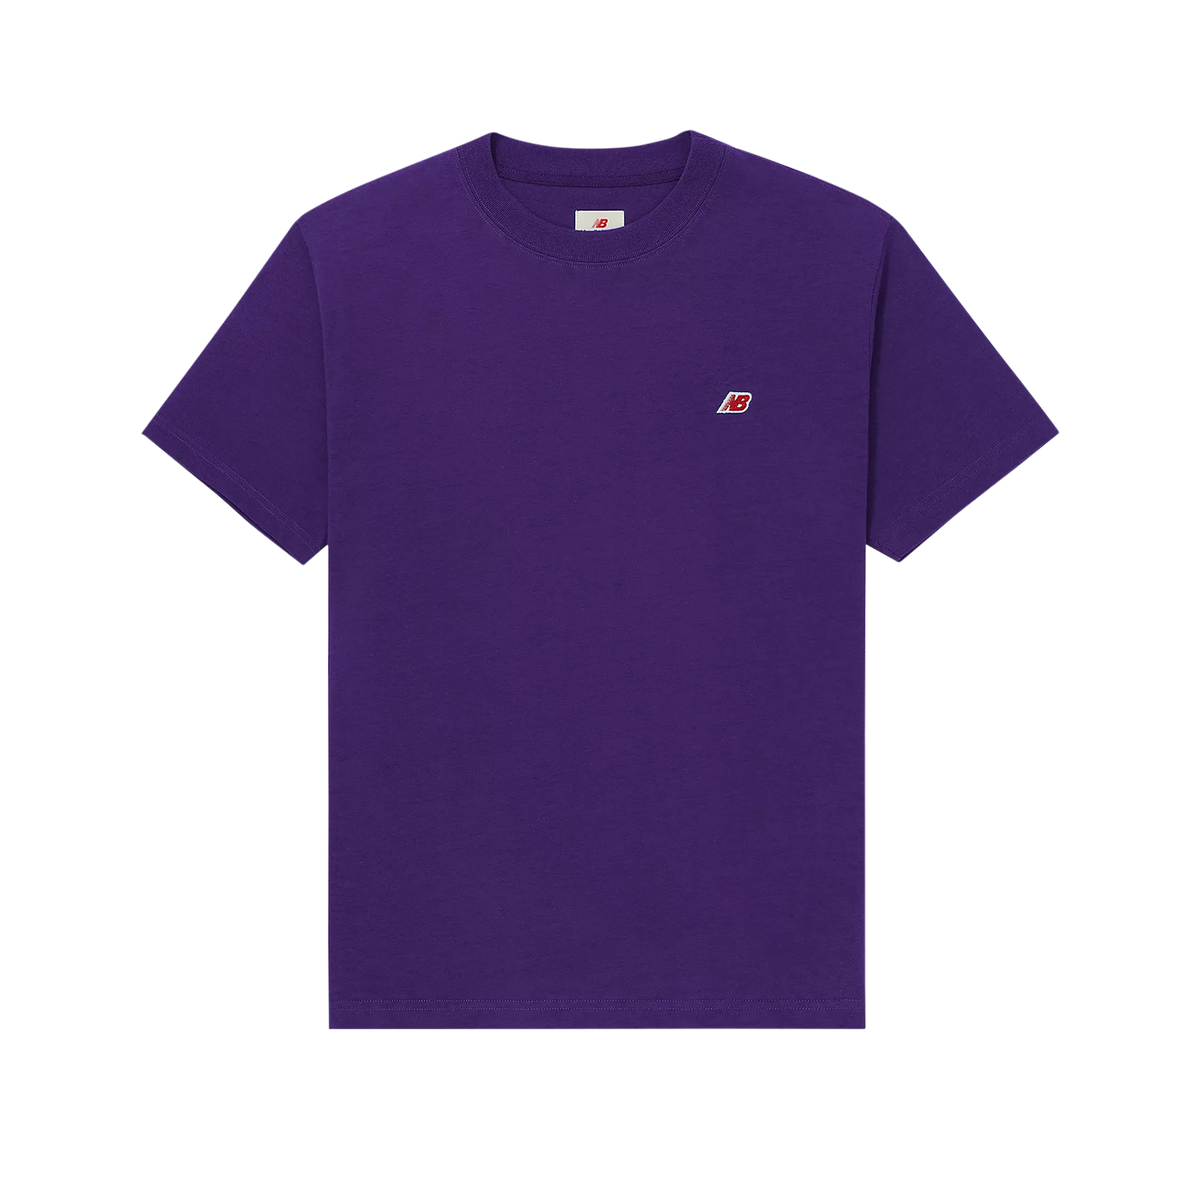 MADE in USA T-Shirt - Prism Purple